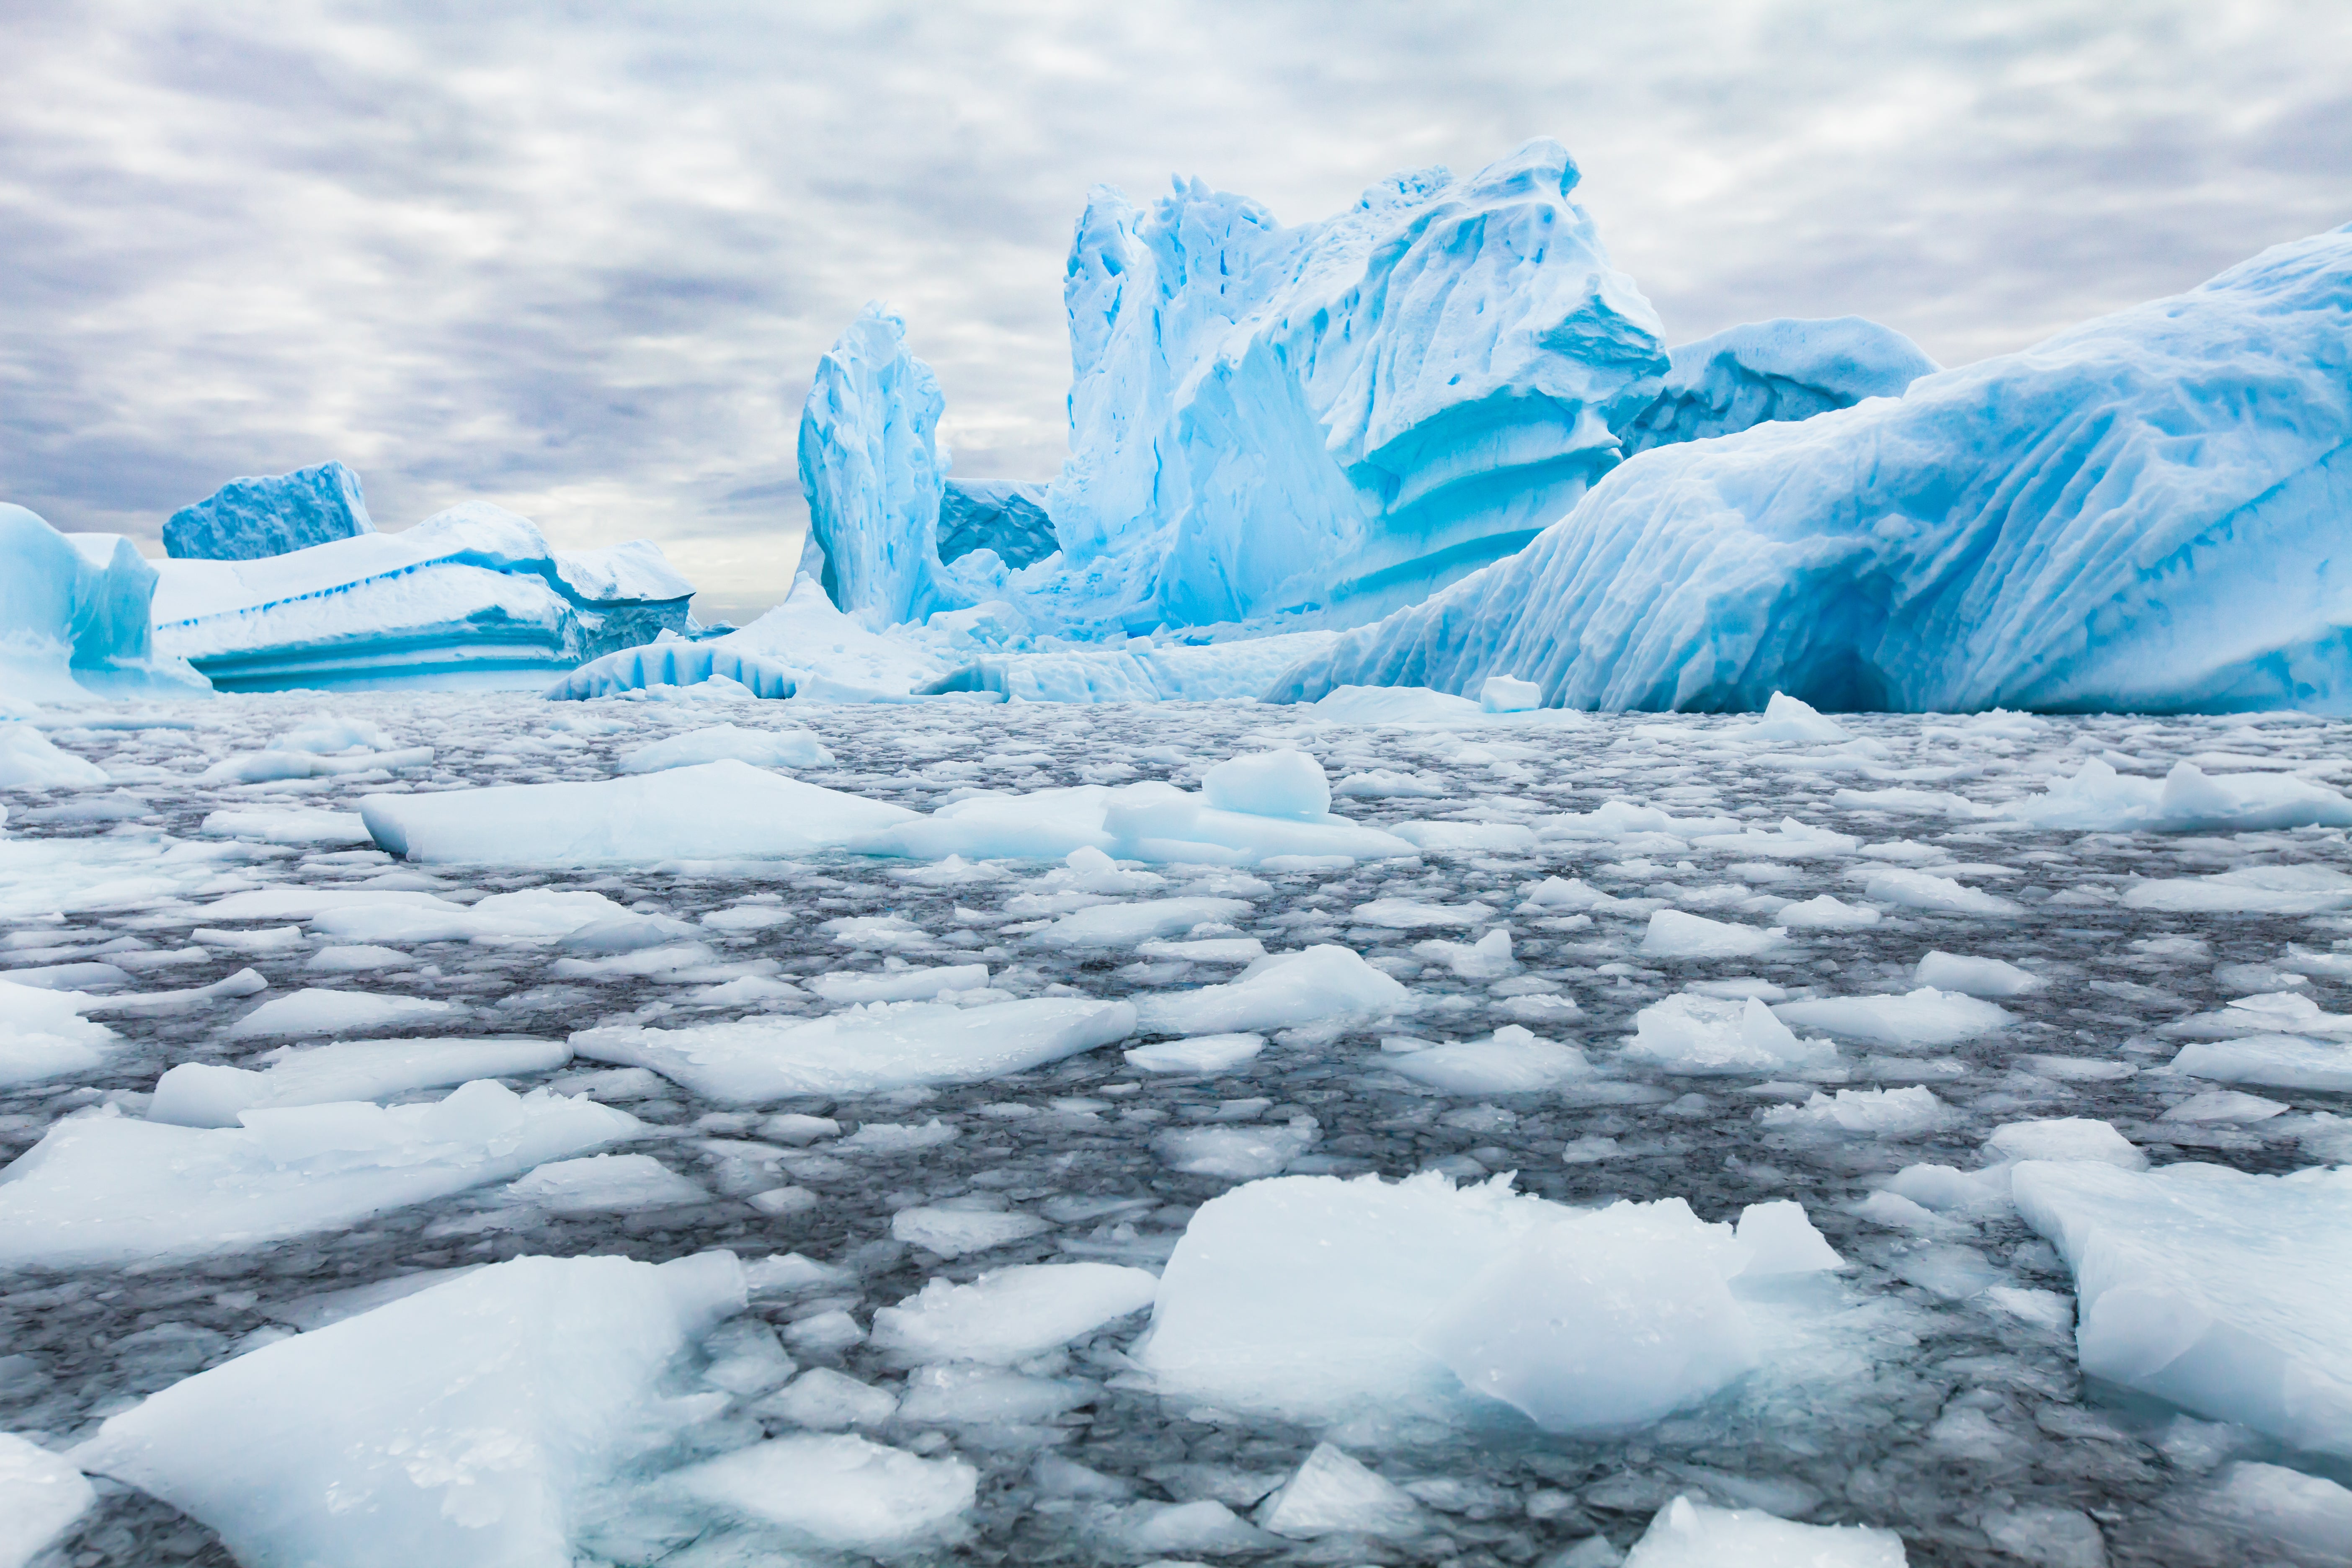 The plan could help melting ice poles to refreeze